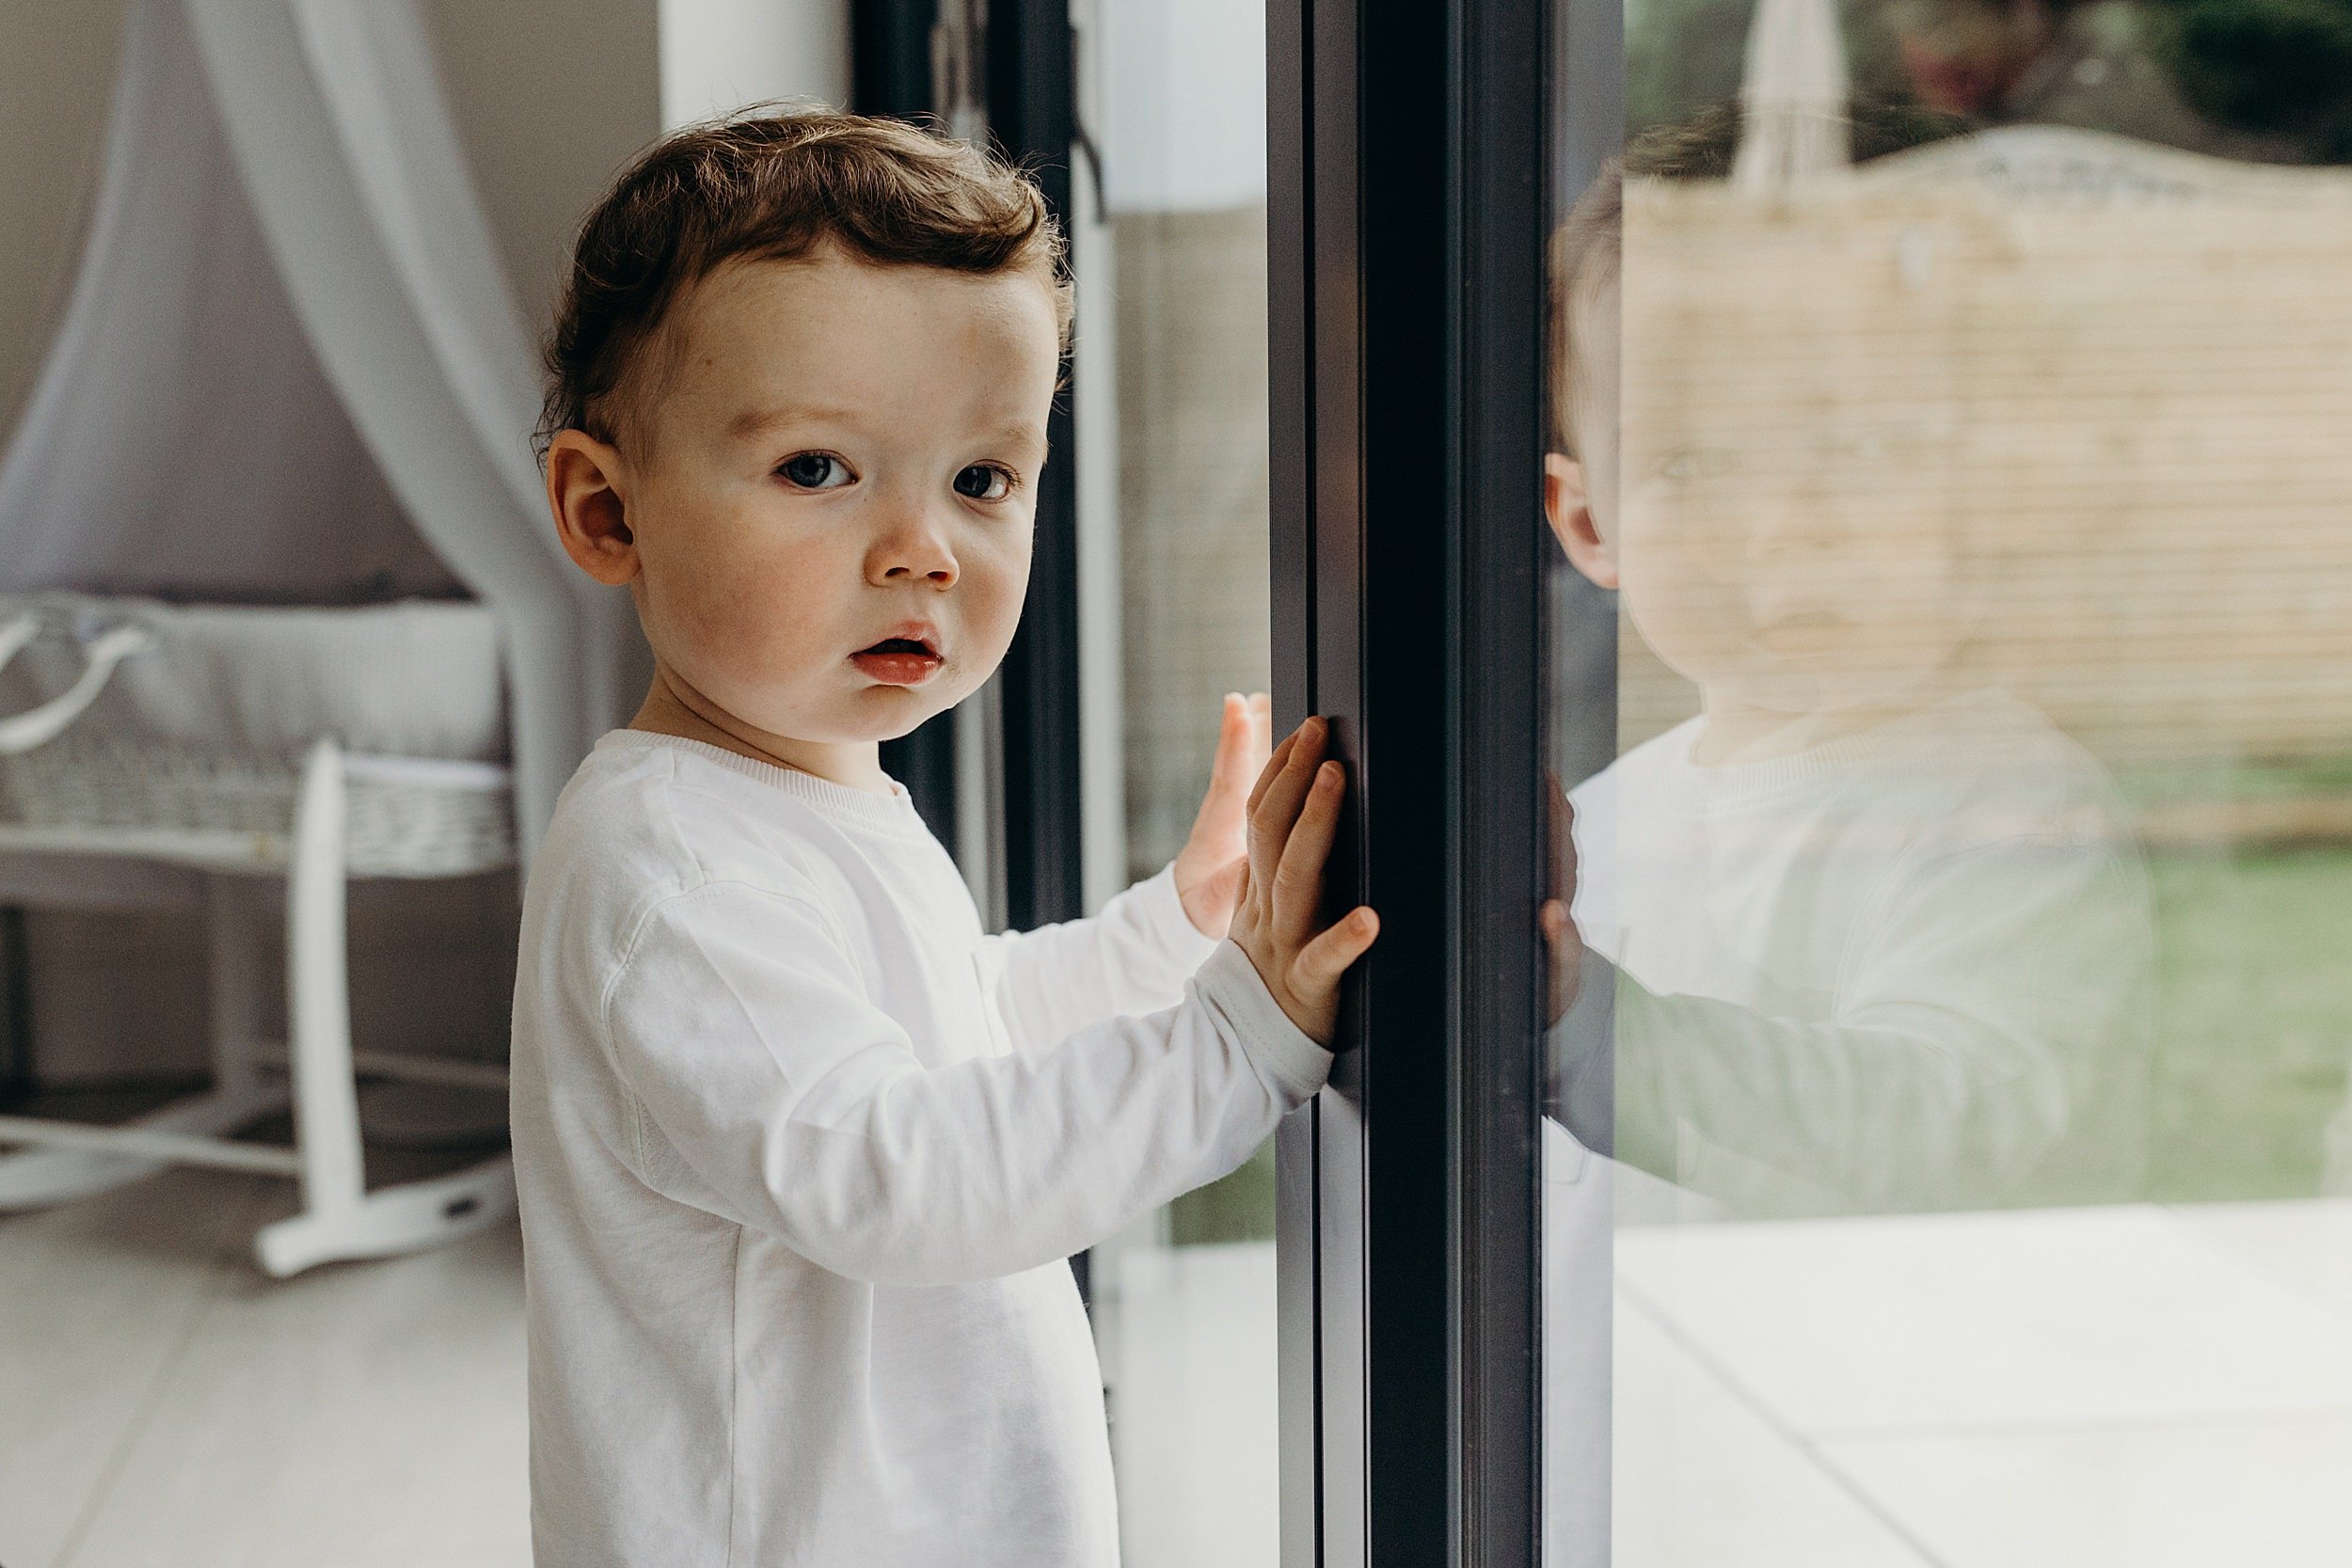 family photographer glasgow scotland captures toddler boy with red hair standing by patio doors with crib in the background